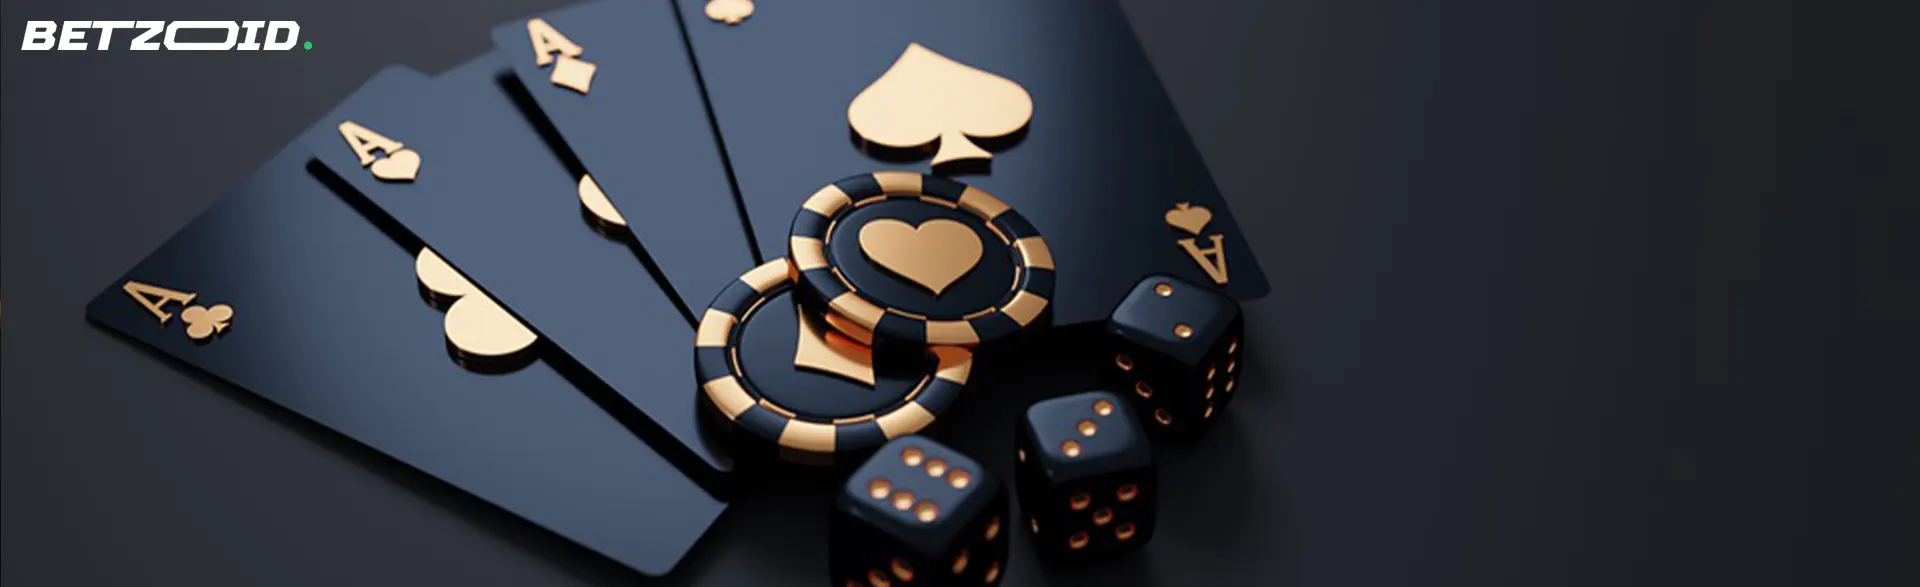 Black playing cards with golden Ace symbols, poker chips, and dice on a dark background.